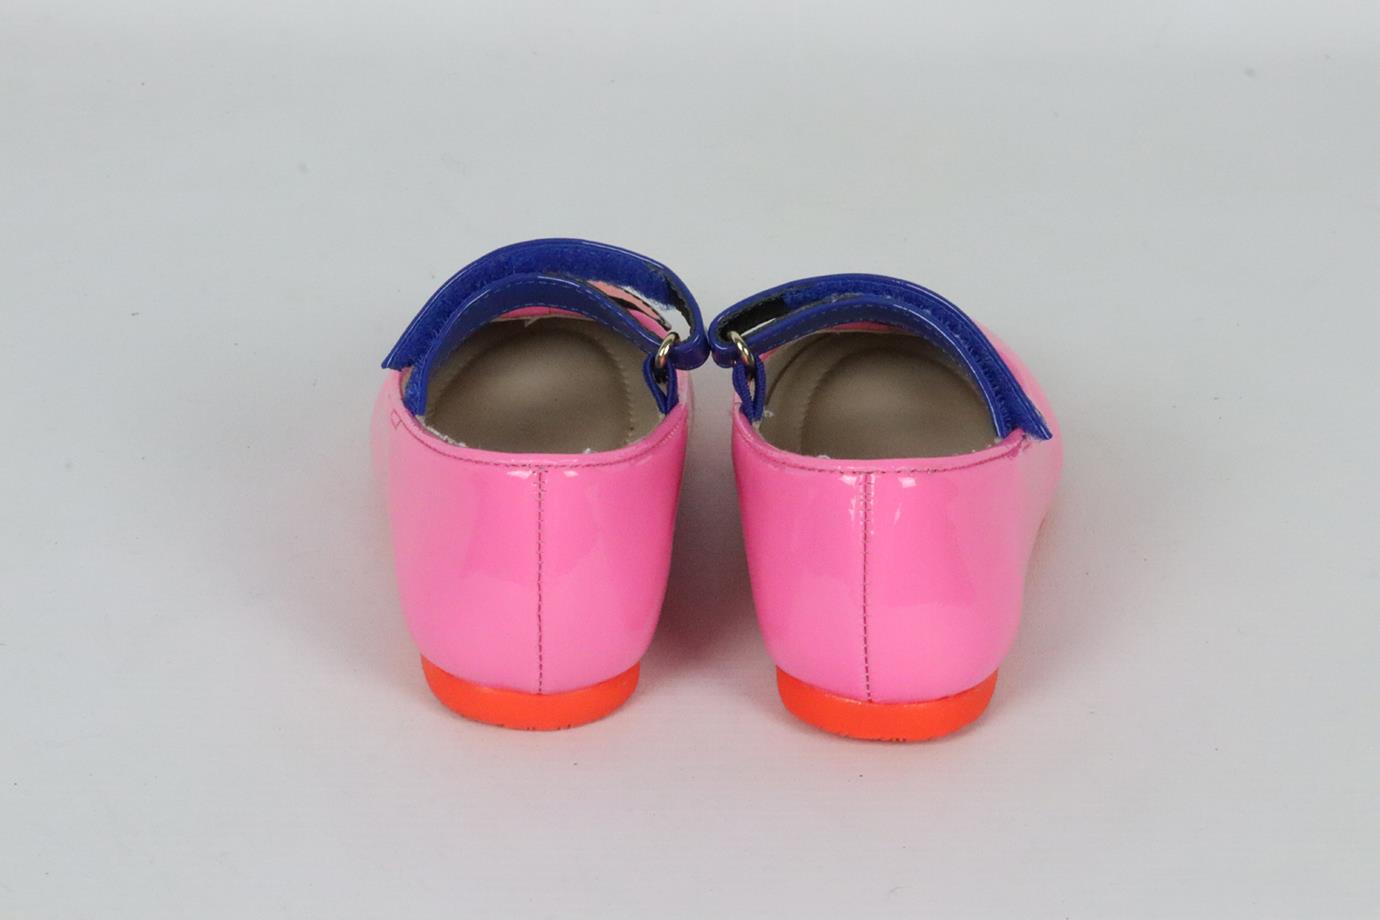 SOPHIA WEBSTER BABY GIRLS BUTTERFLY PATENT LEATHER SHOES EU 23 UK 6